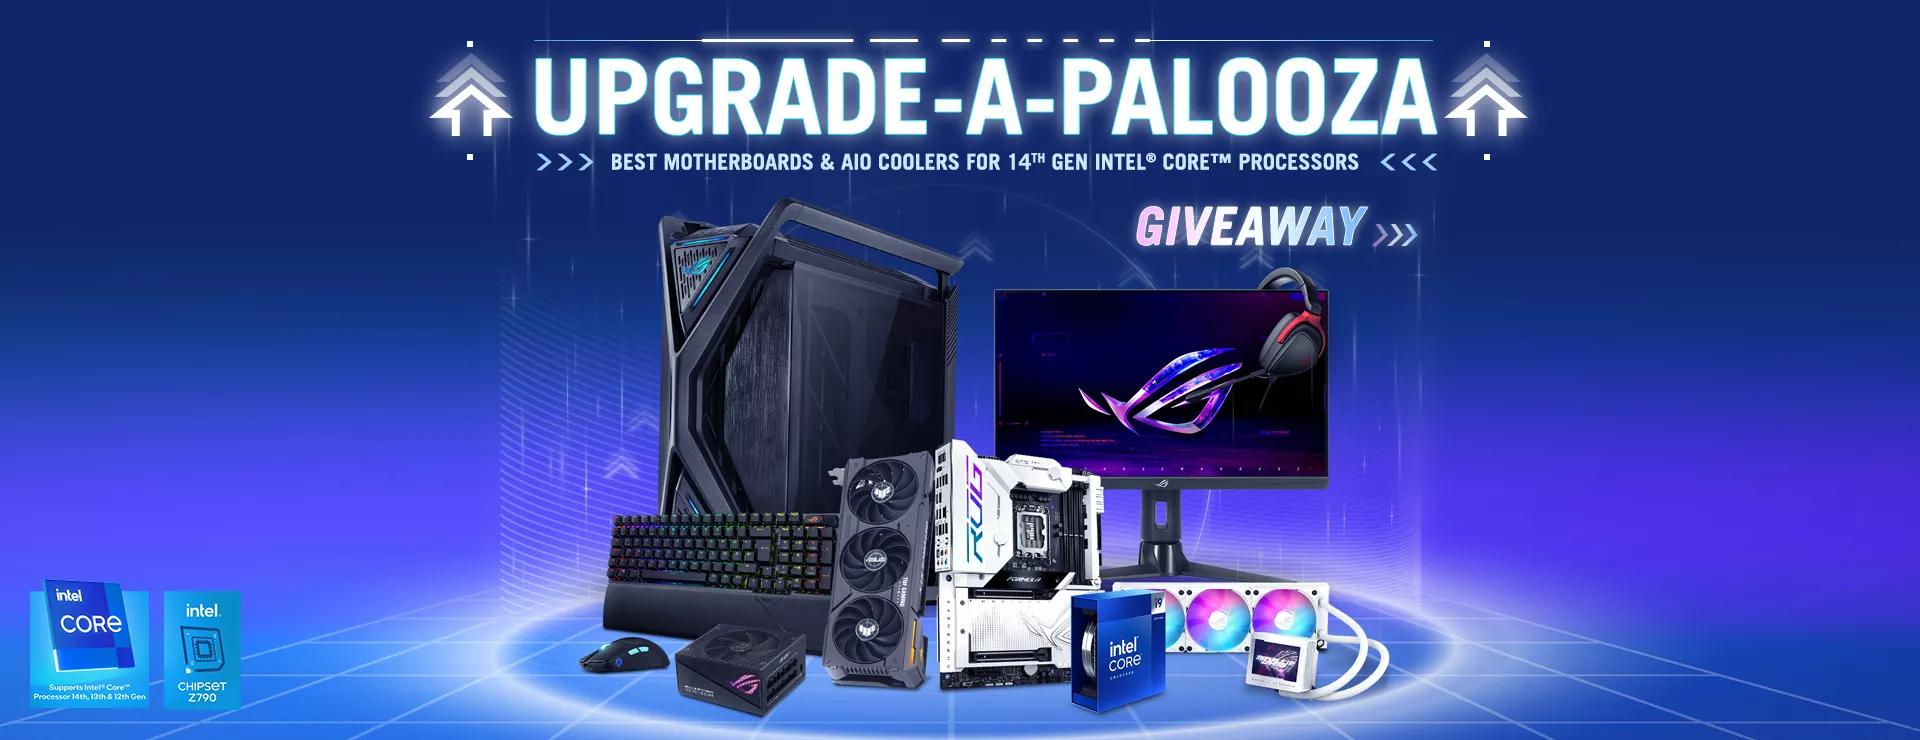 ASUS Z790 motherboard & AIO Cooler campaign banner